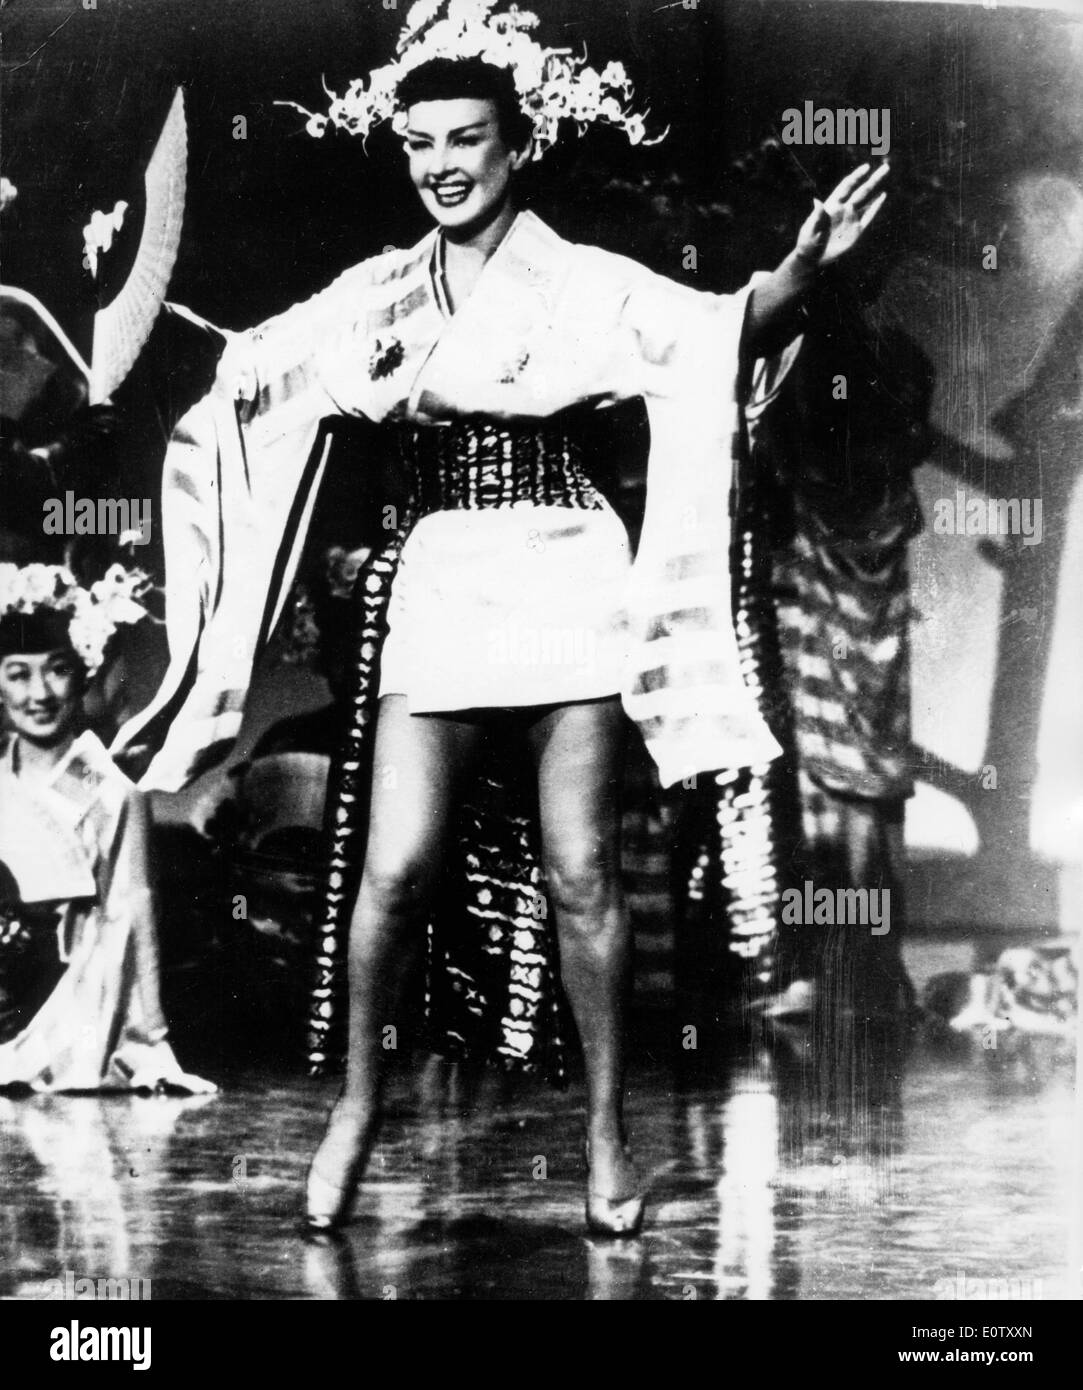 Actress Betty Grable on stage dancing during a performance Stock Photo